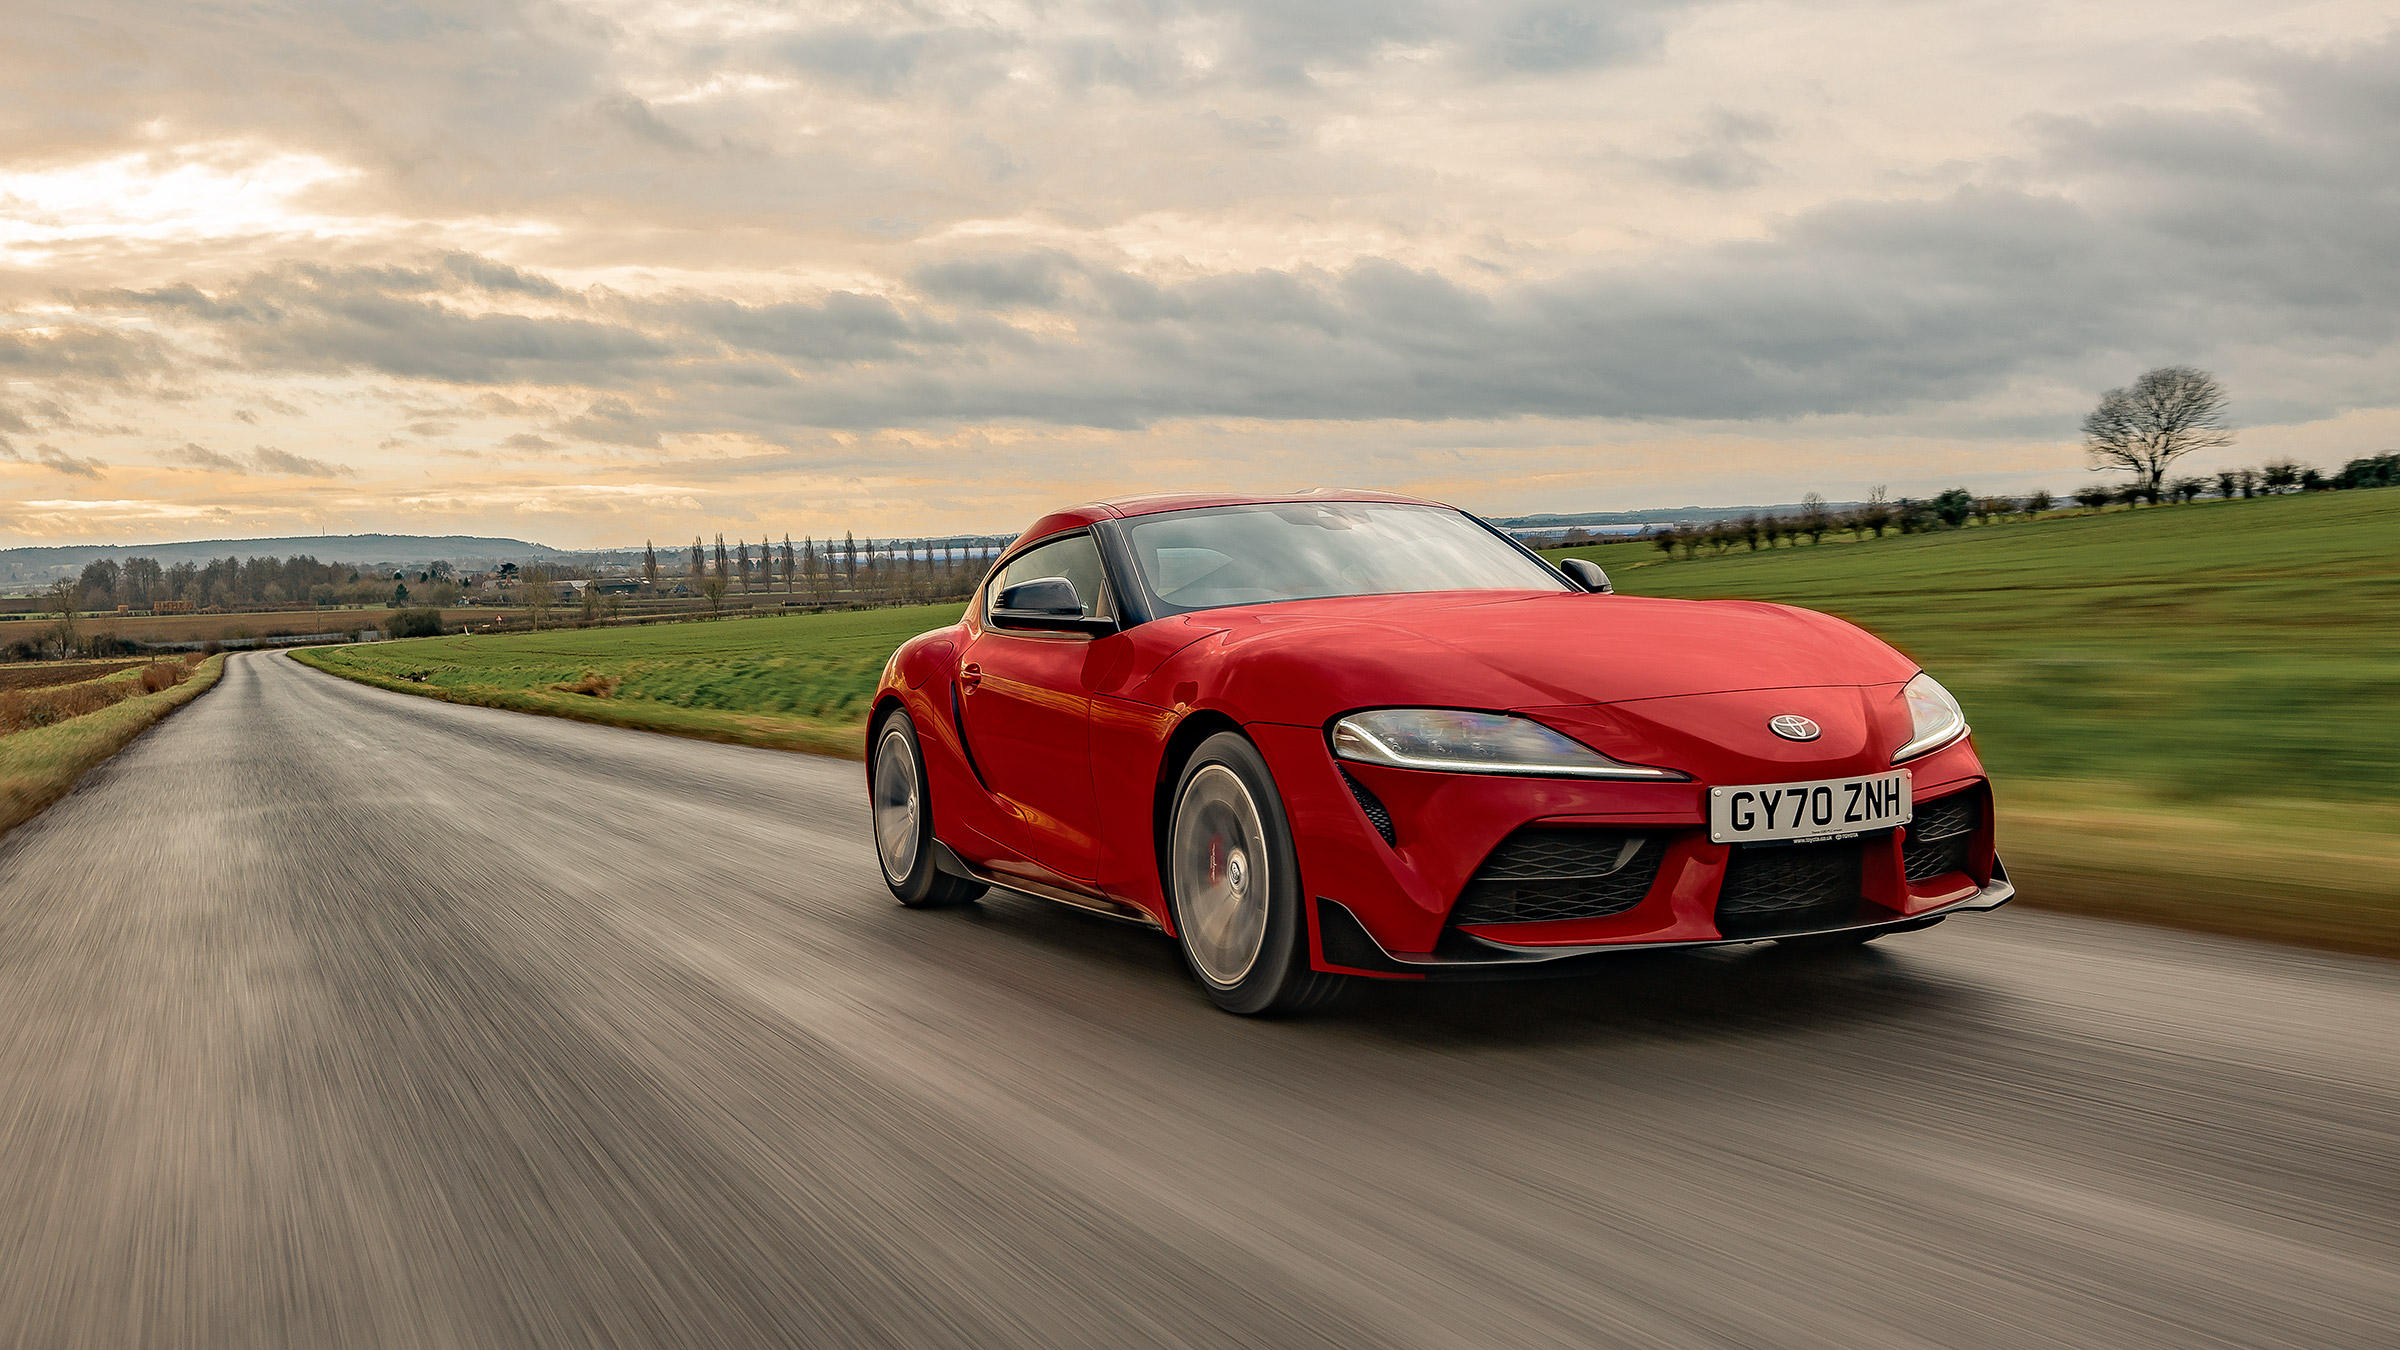 2021 Toyota Supra 2.0 first drive review: Trading power for poise